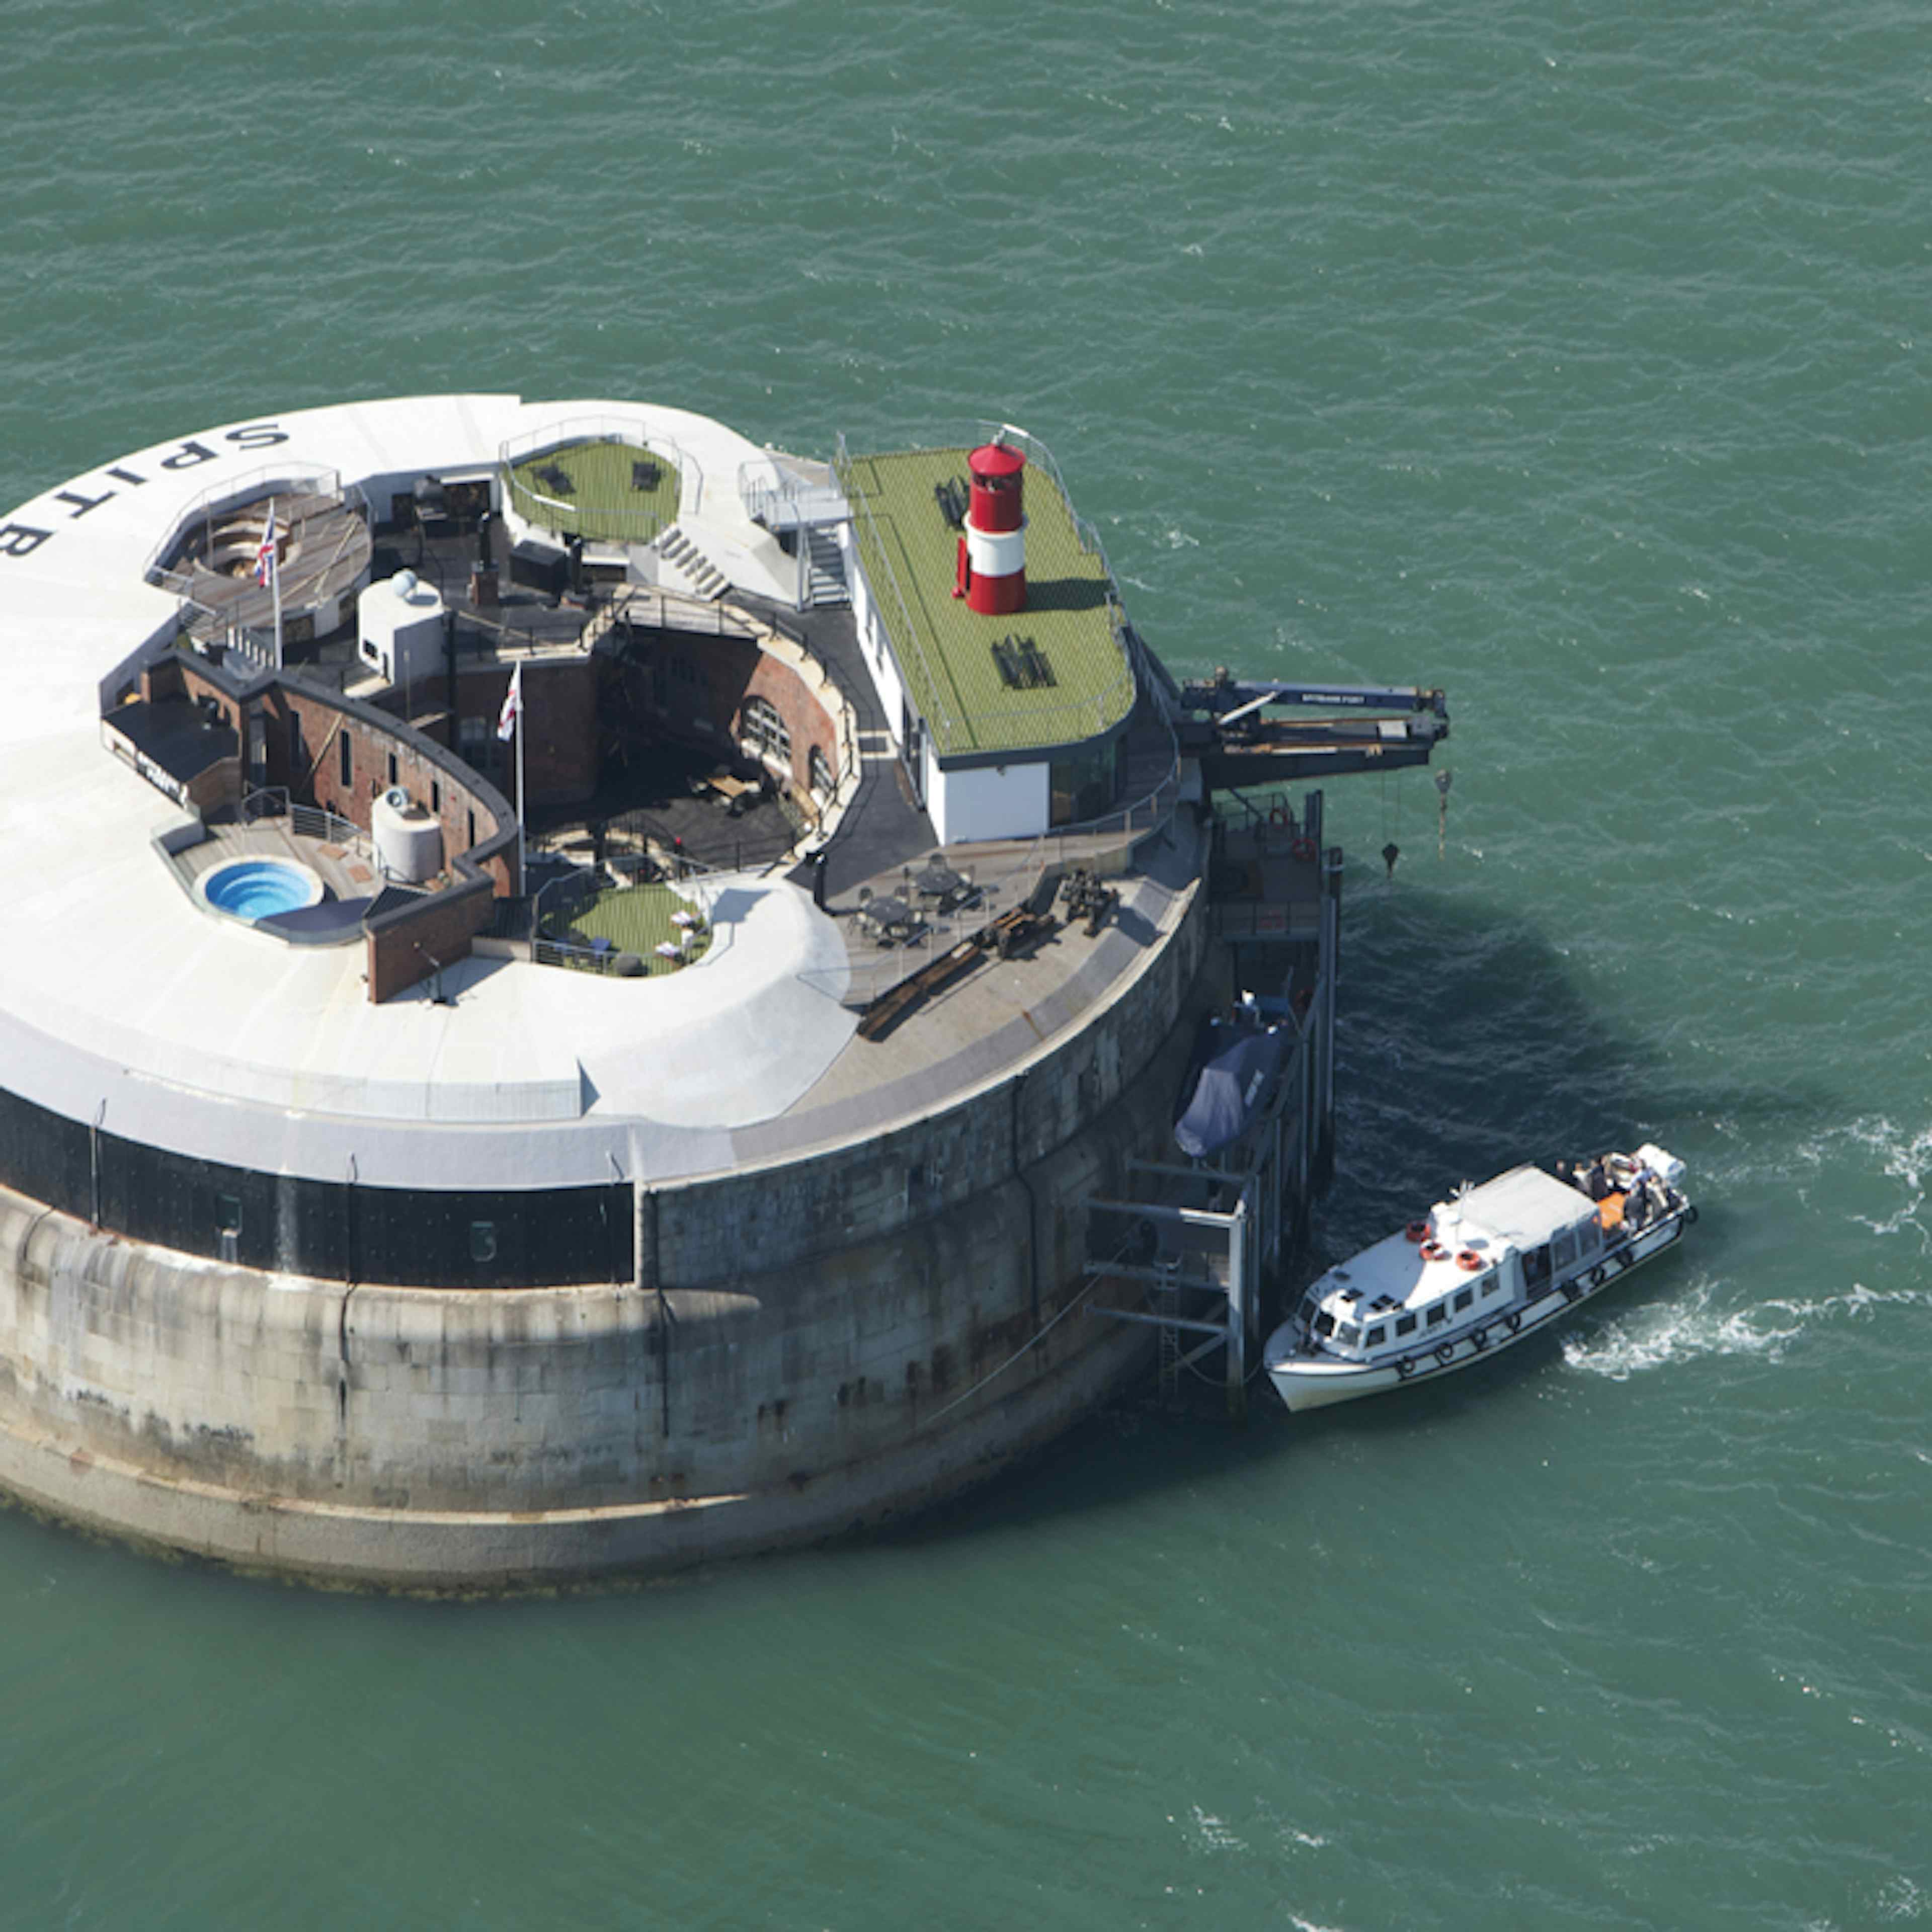 Spitbank Fort - The Victory Bar  image 3